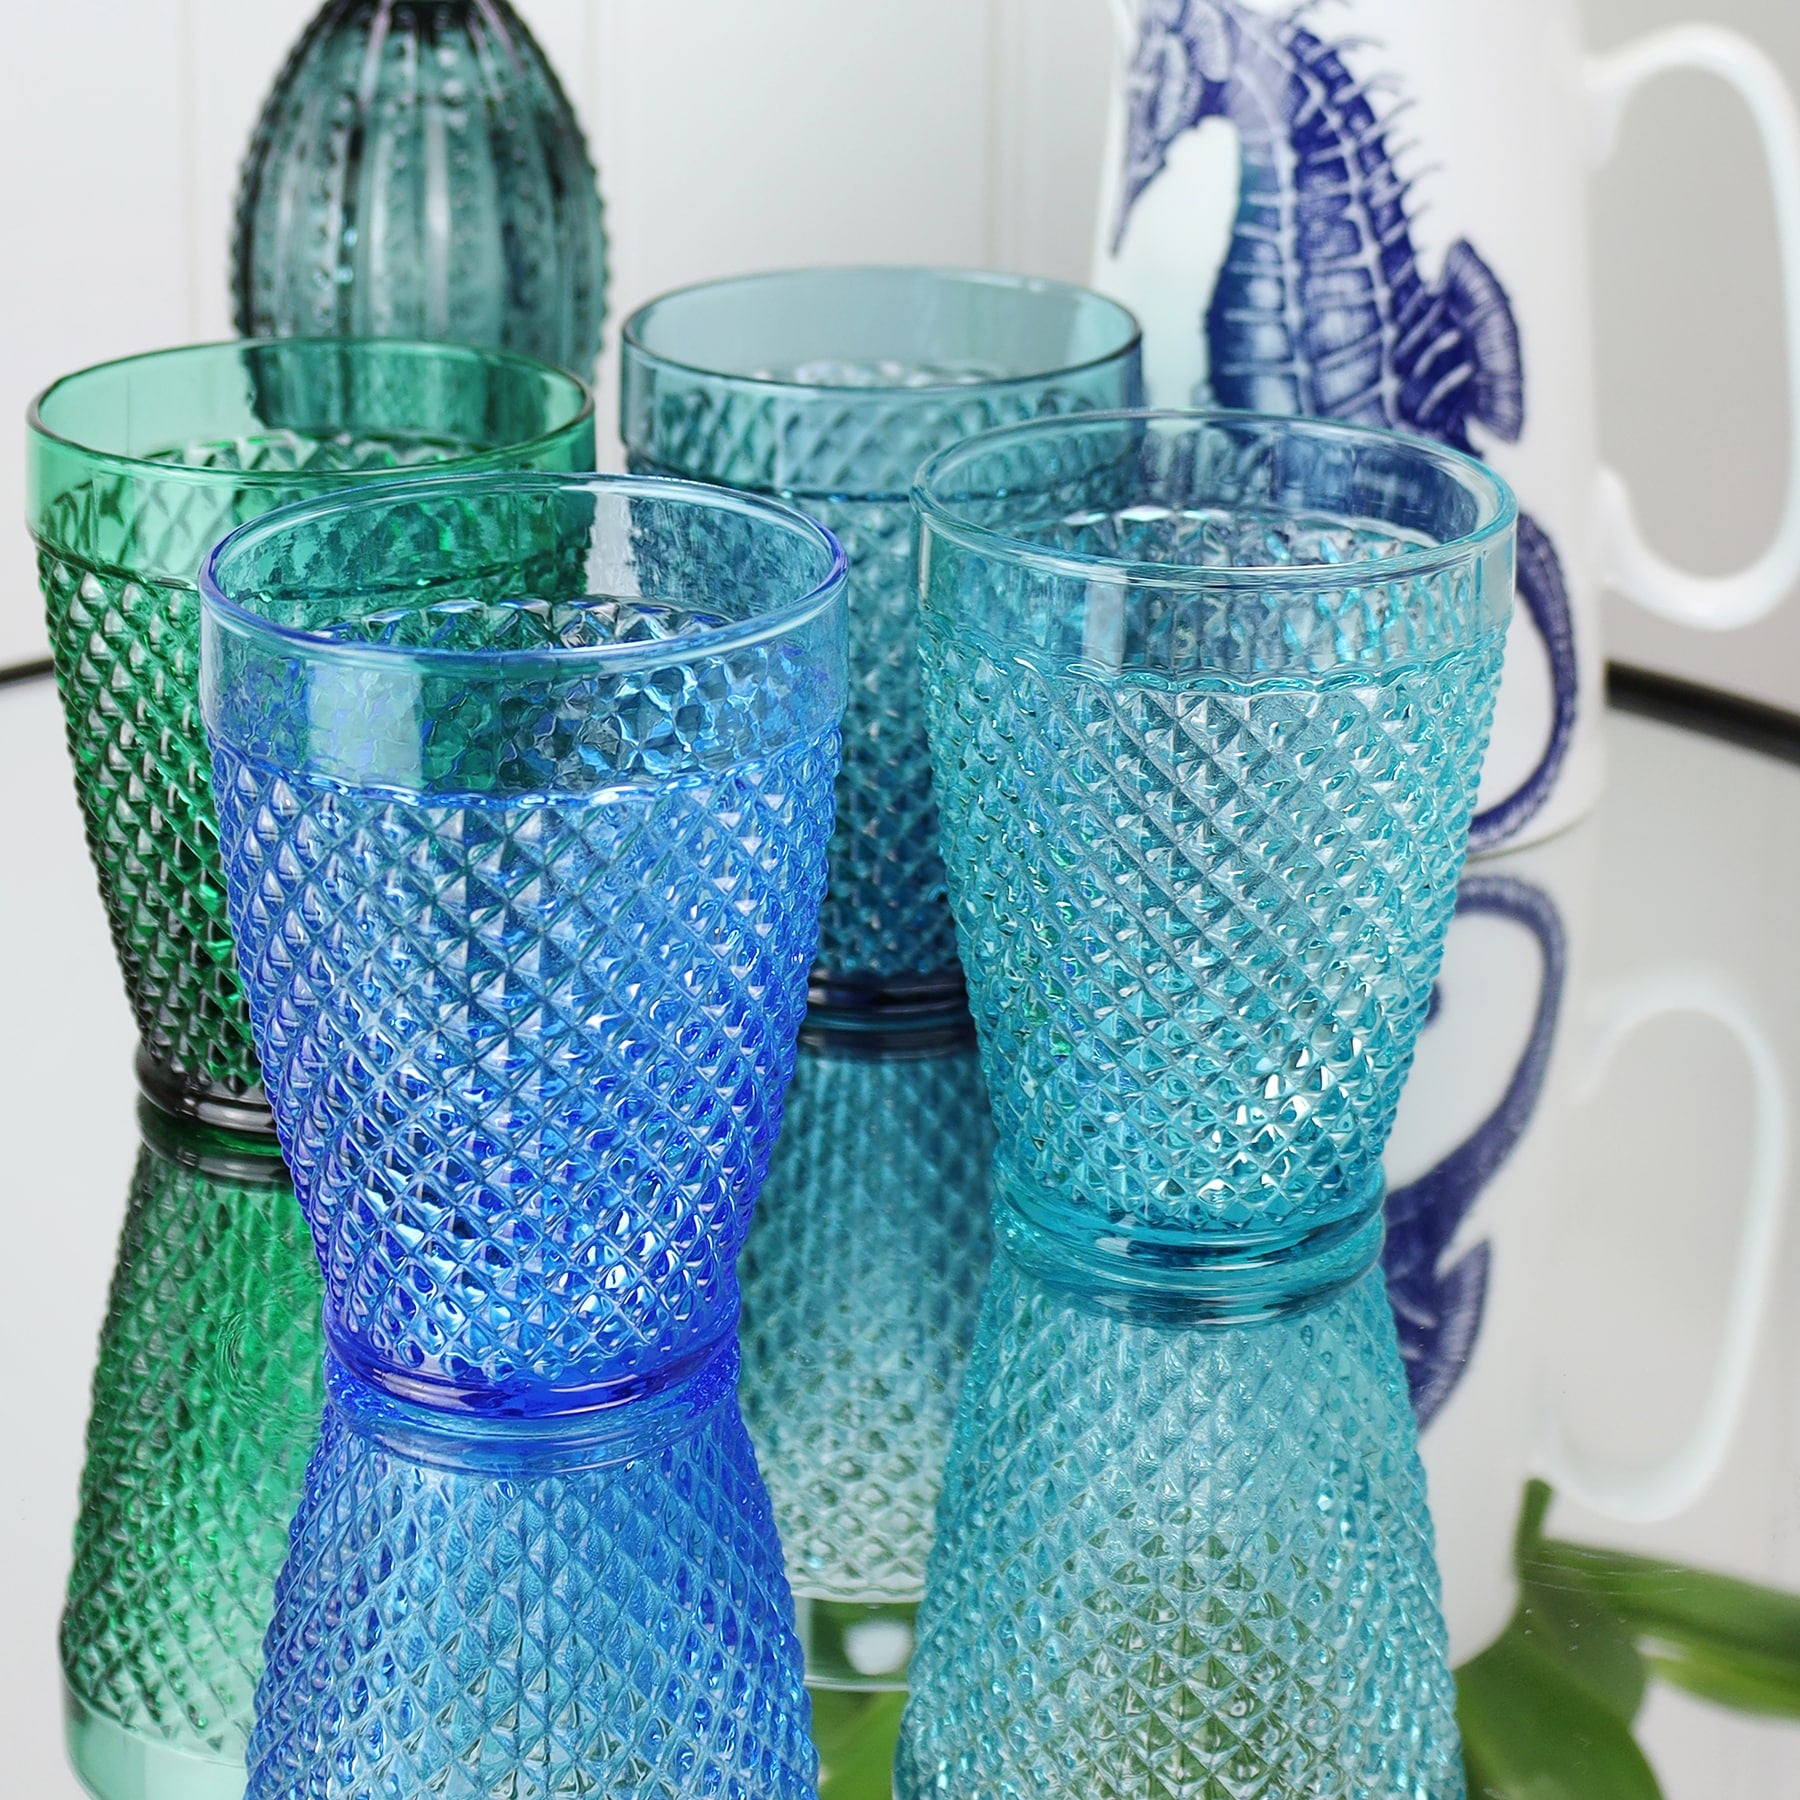 Lifestyle shot of four diamond cut tumblers on a mirror top table,in the background is a seahorse jug